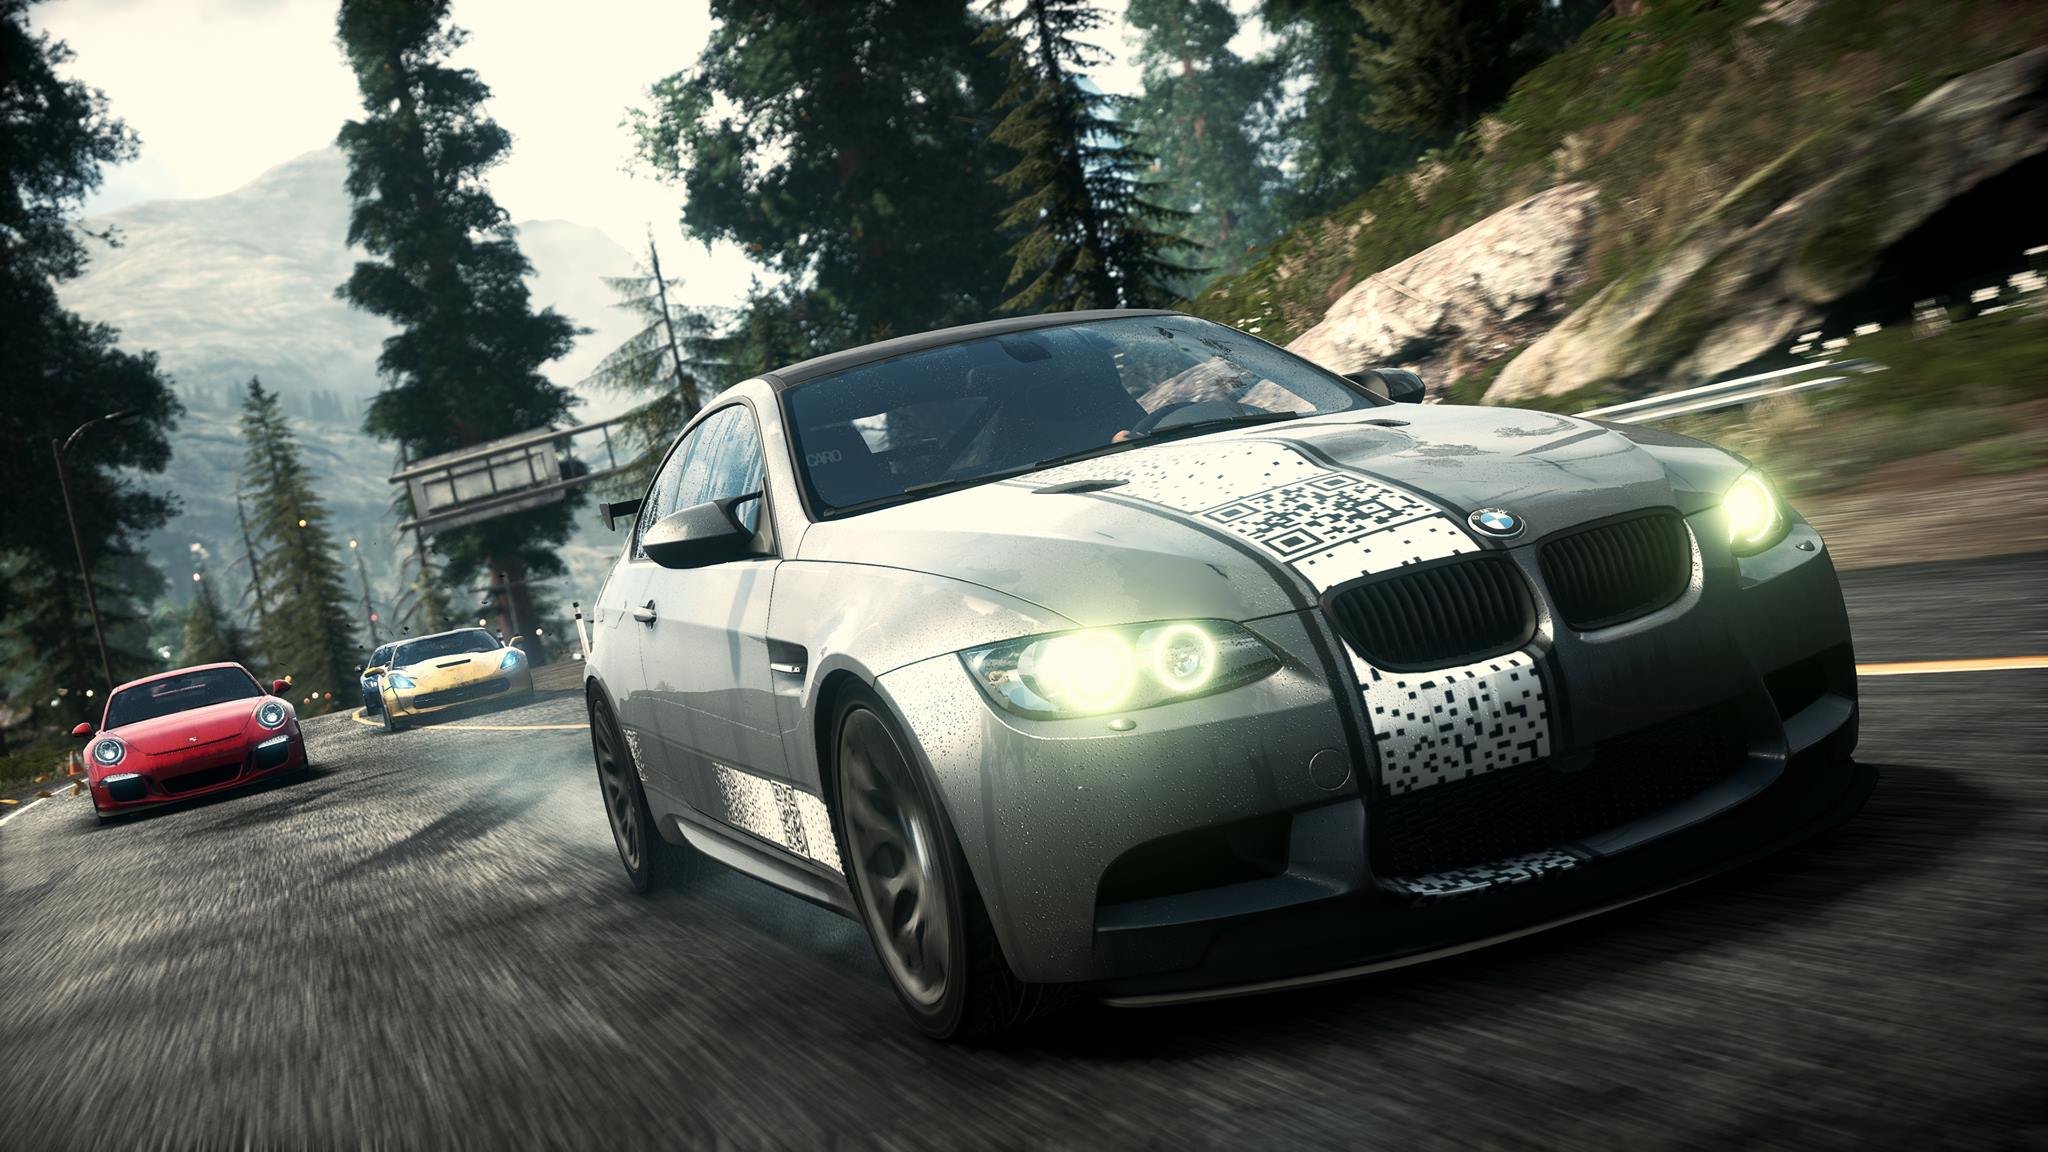 Need for Speed Rivals Xbox 360. Need for Speed Rivals BMW m3 GTR. Игра NFS Rivals. Need for Speed Rivals 2013. Игры гонки нид фор спид